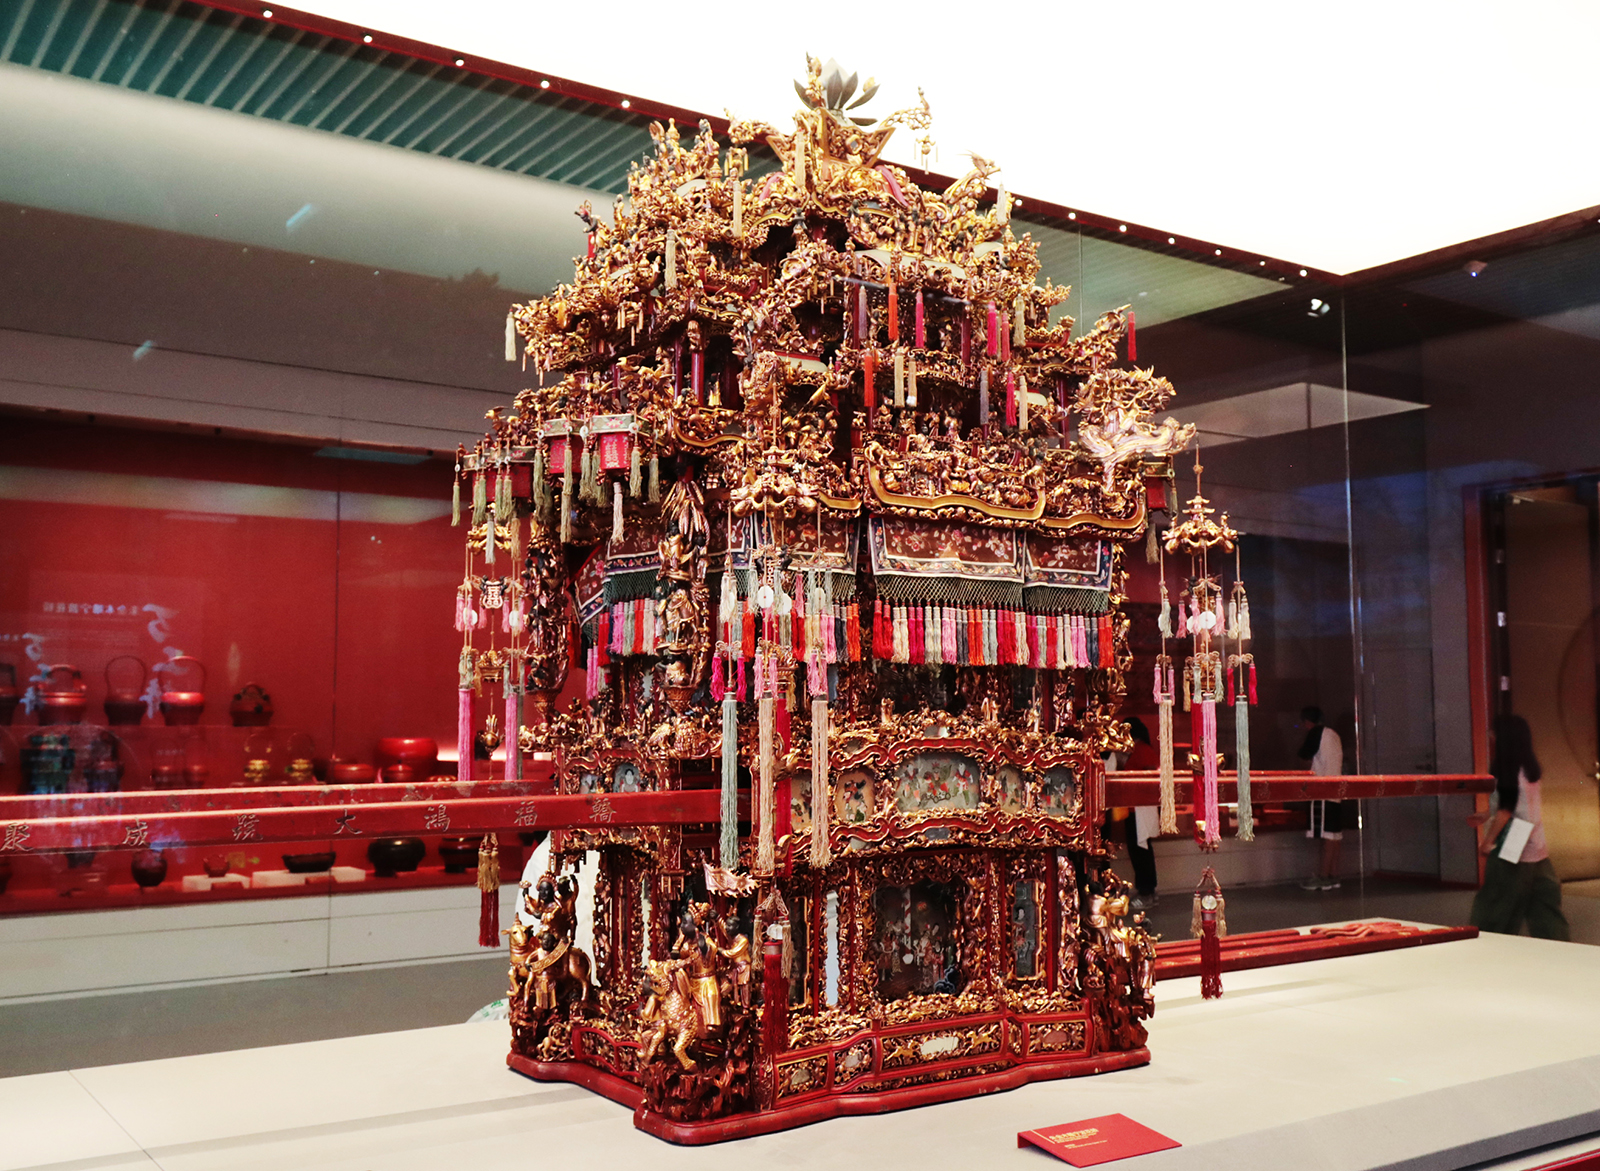 A Ningbo cinnabar gold and lacquer wood-carved sedan chair is on display at the Zhijiang Branch of the Zhejiang Provincial Museum in Hangzhou, Zhejiang Province. Known as 